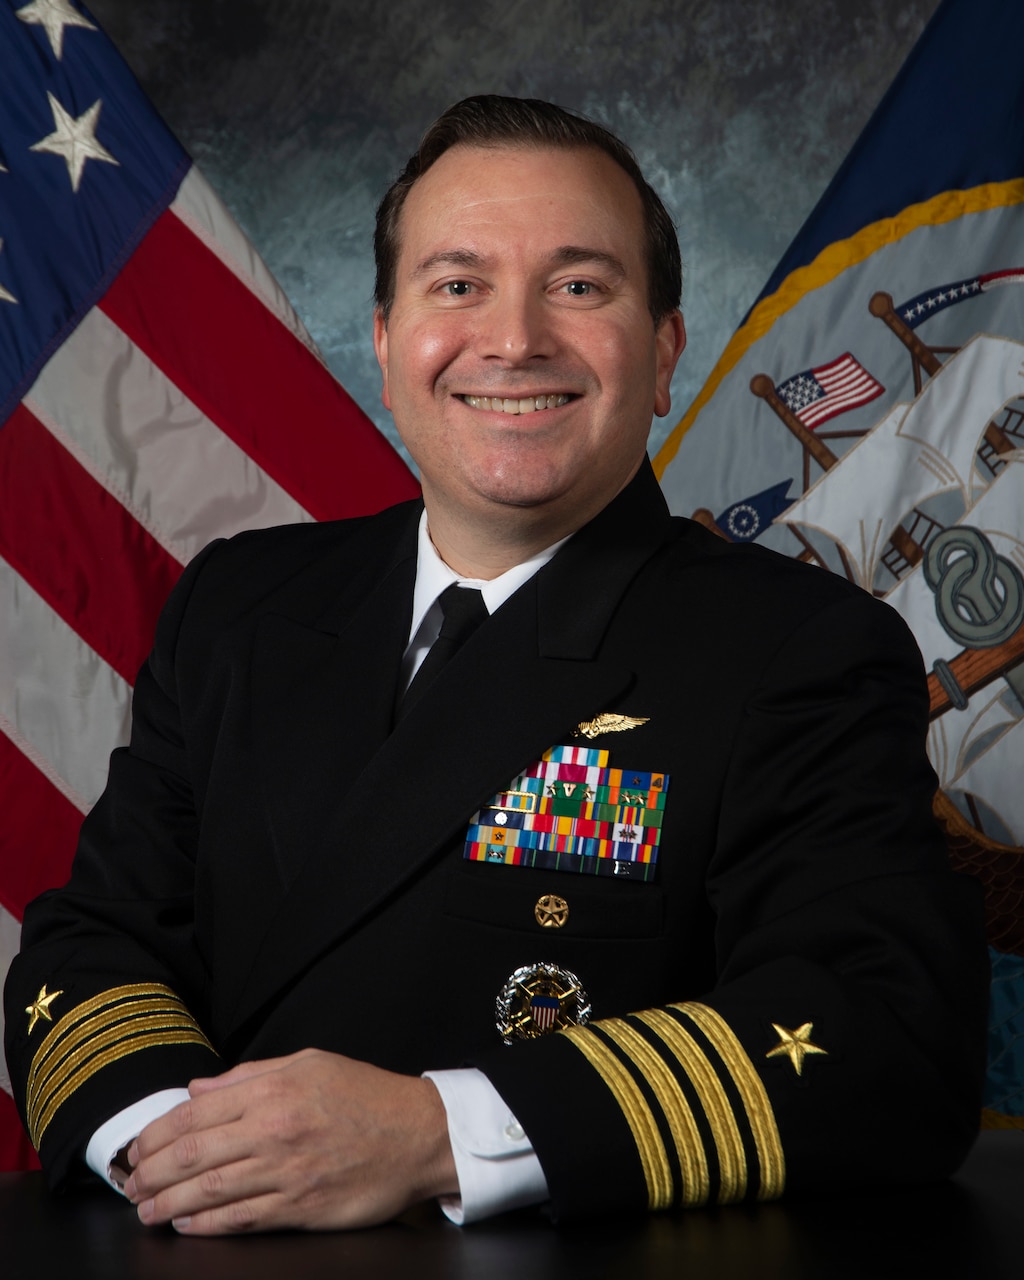 Official studio portrait of Capt. Eric Sinibaldi, Chief of Staff, Carrier Strike Group Eight